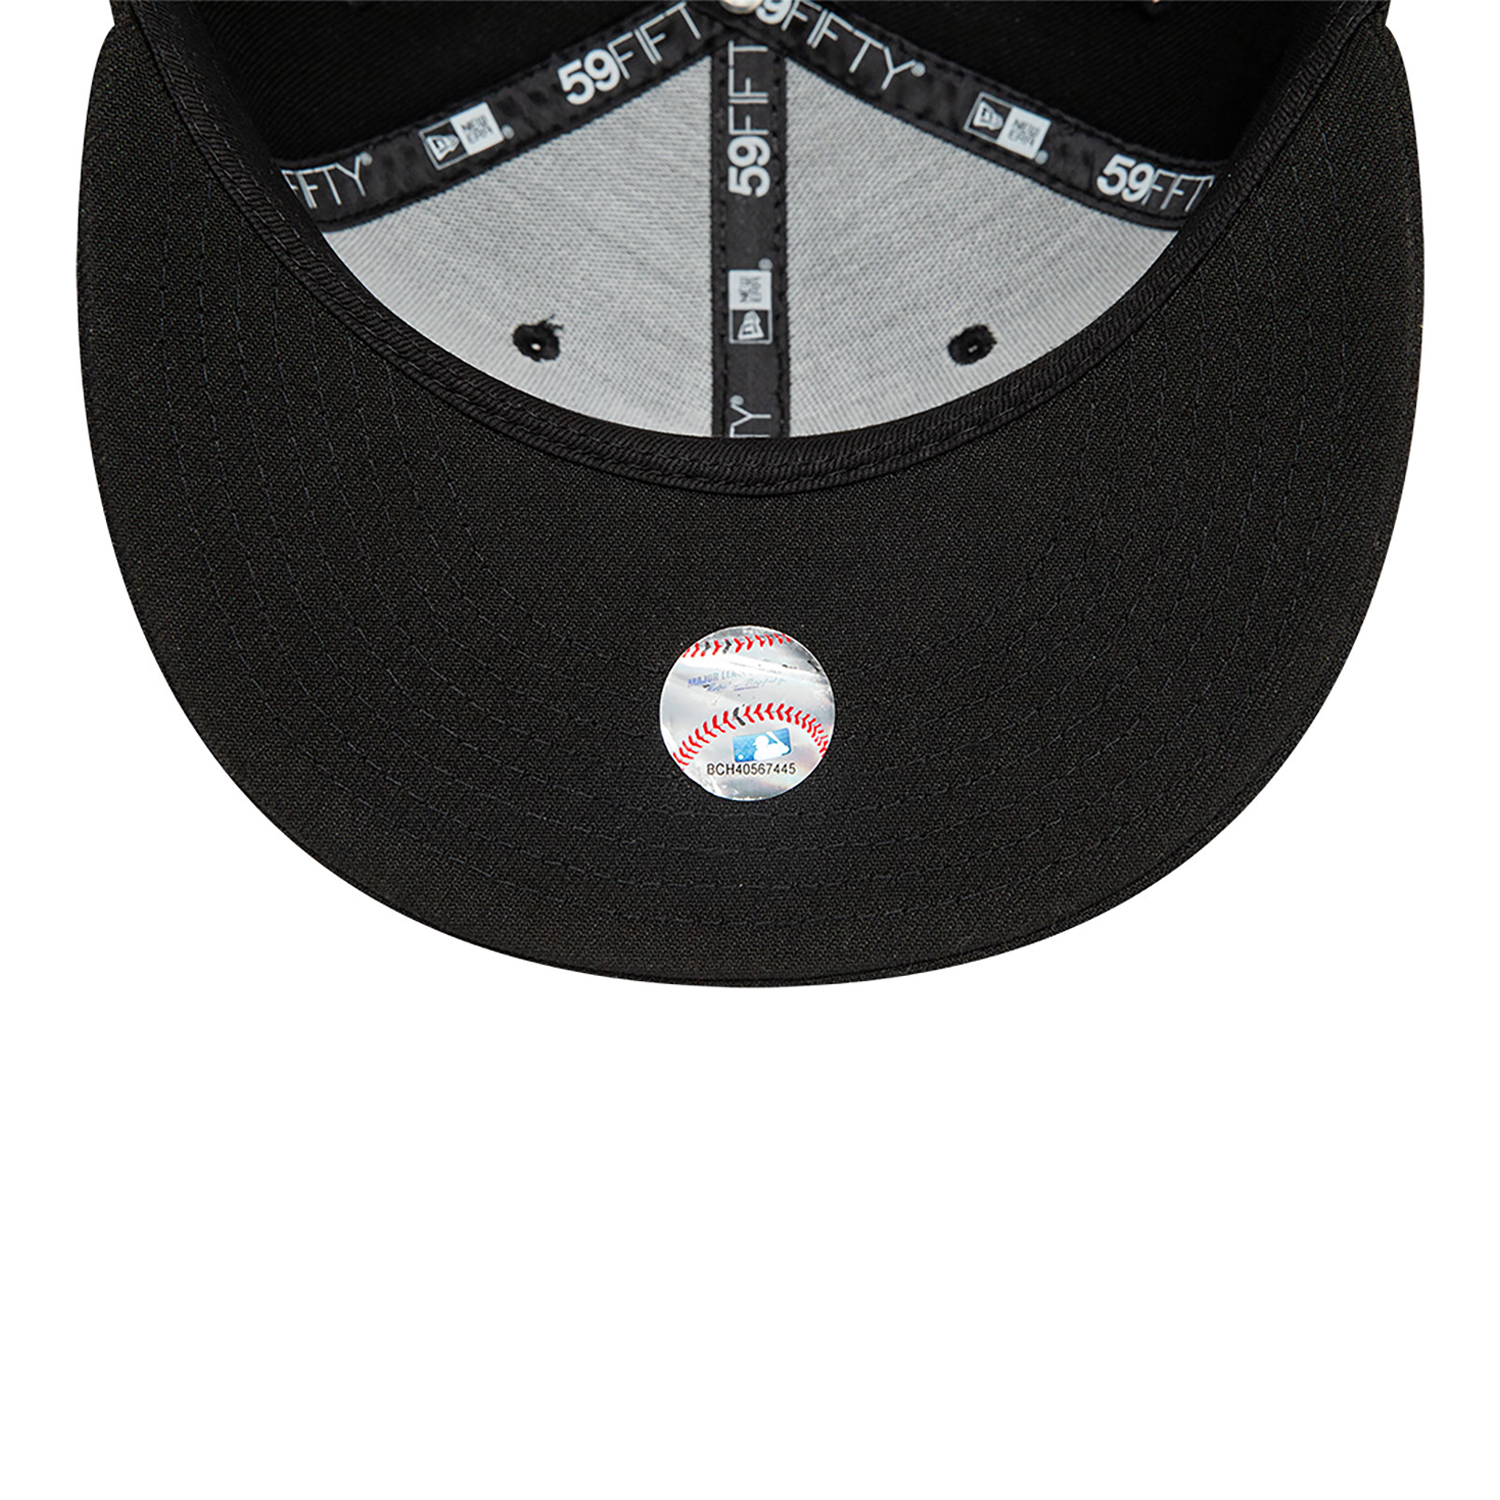 Casquette 59FIFTY Fitted MLB London Series